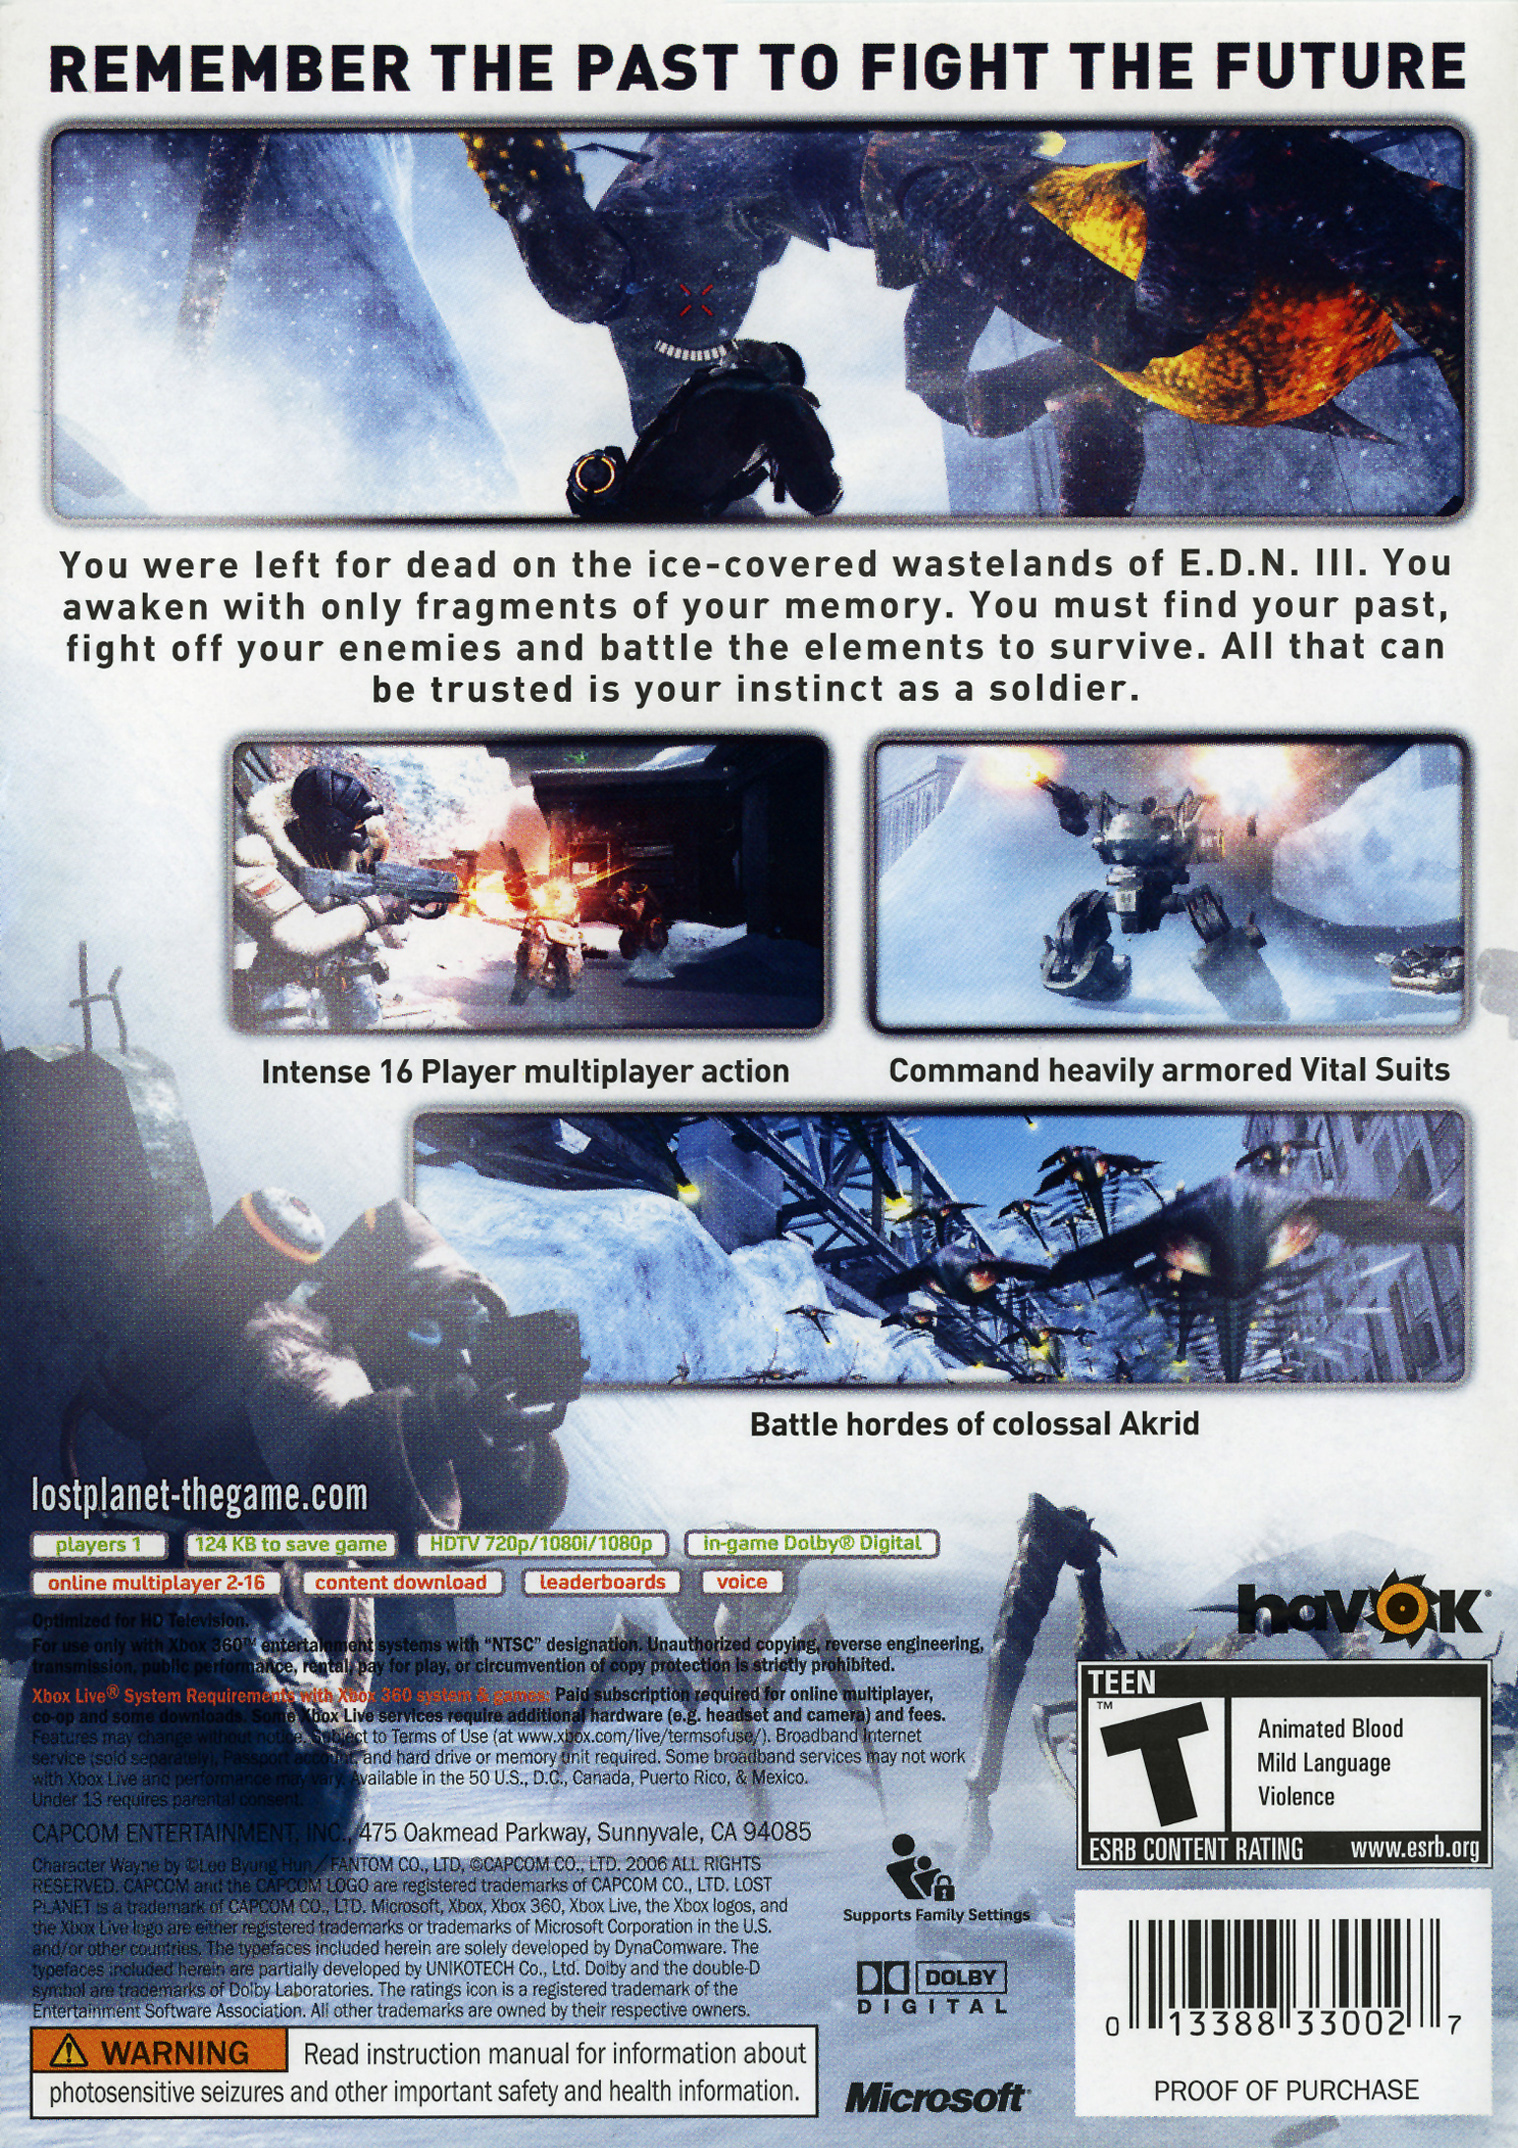 lost planet extreme condition game playstation 3 game download